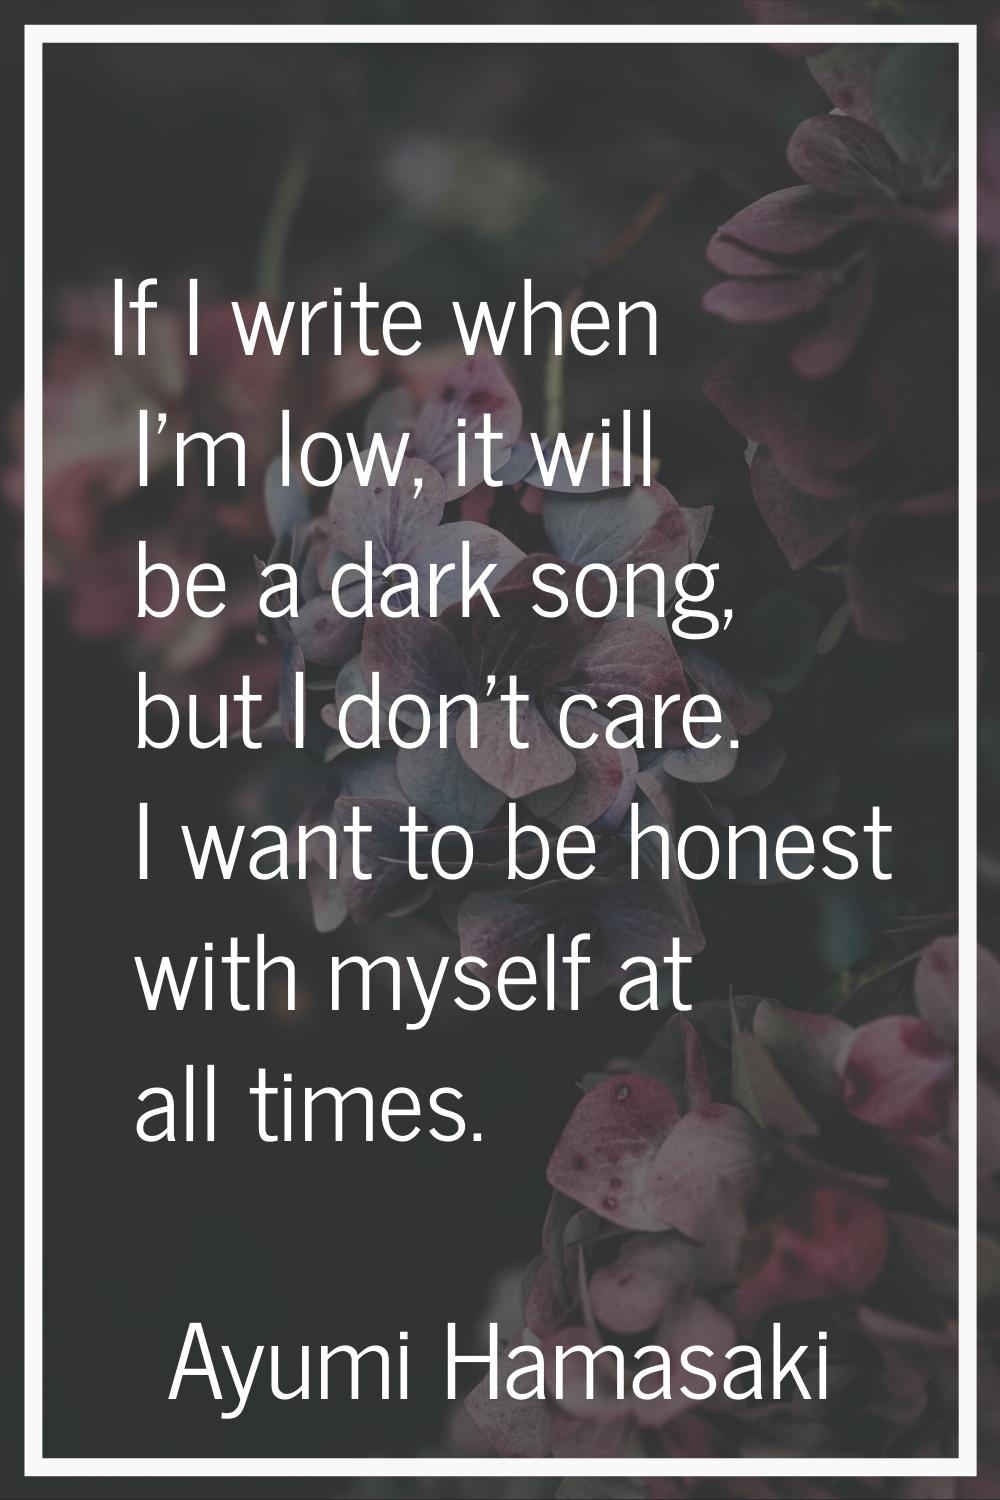 If I write when I'm low, it will be a dark song, but I don't care. I want to be honest with myself 